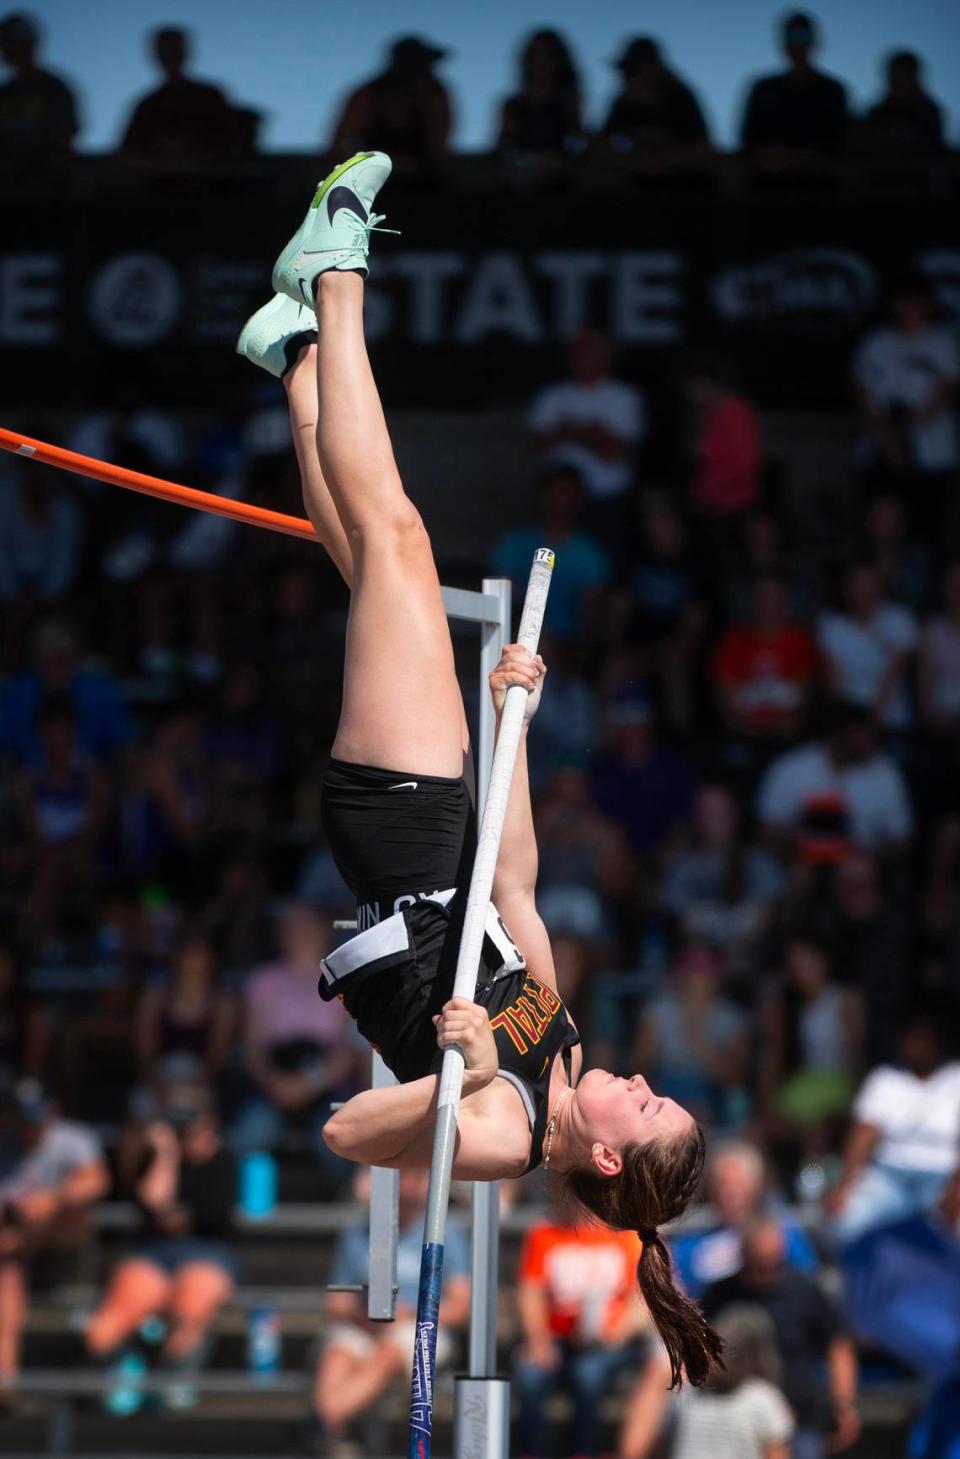 Capital’s Hana Moll goes up and over the bar en route to a a state title and new meet record of 14’ 7” during the second day of the WIAA state track and field championships at Mount Tahoma High School in Tacoma, Washington, on Friday, May 26, 2023.